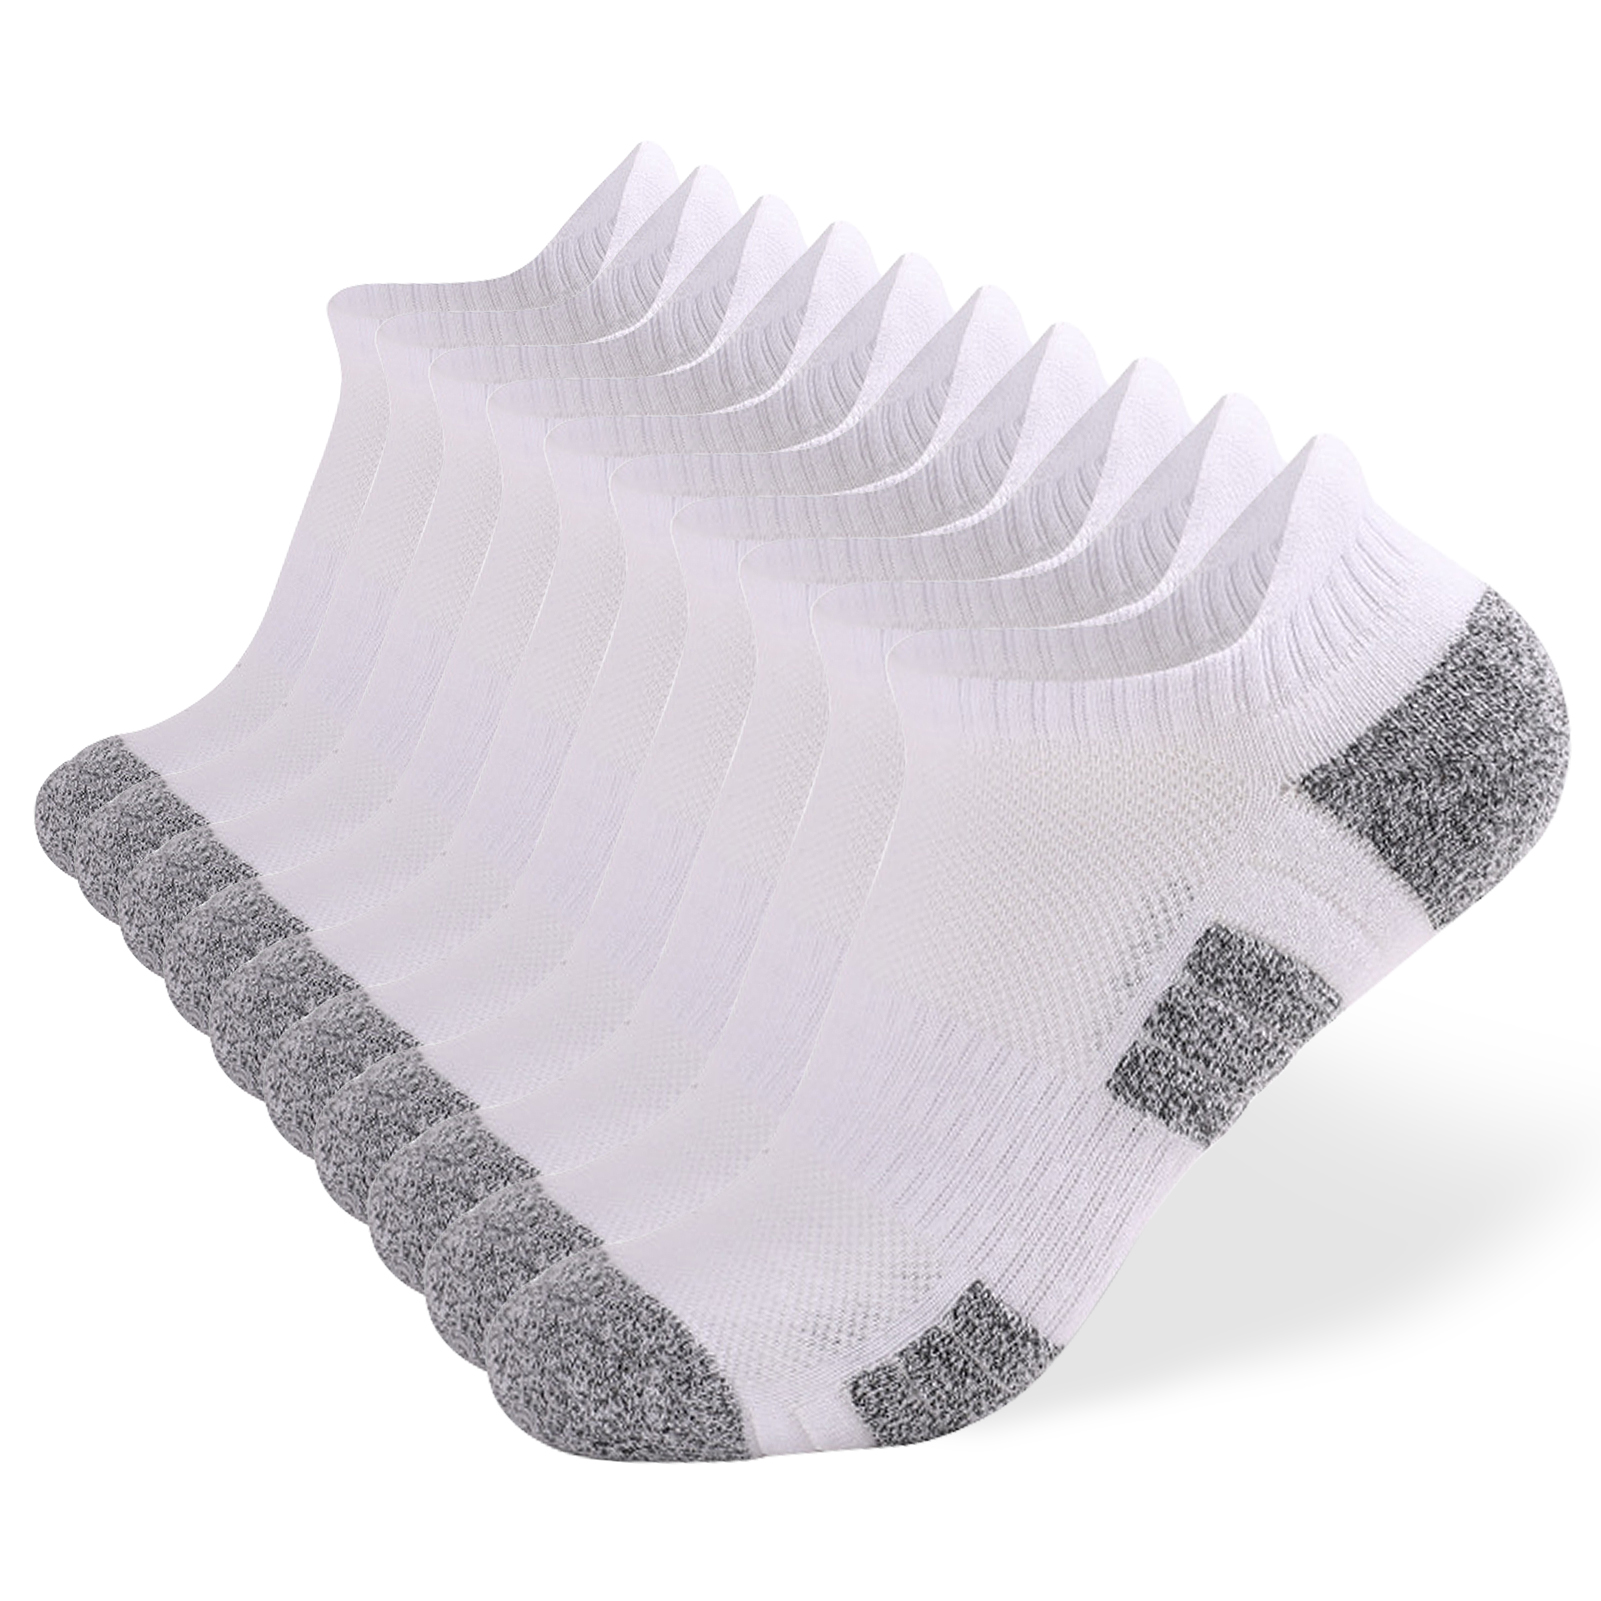 Tomshoo Running Socks, 10 Pack Breathable Cushioned Athletic Ankle Socks, Low Cut Sport Hiking Running - image 1 of 7